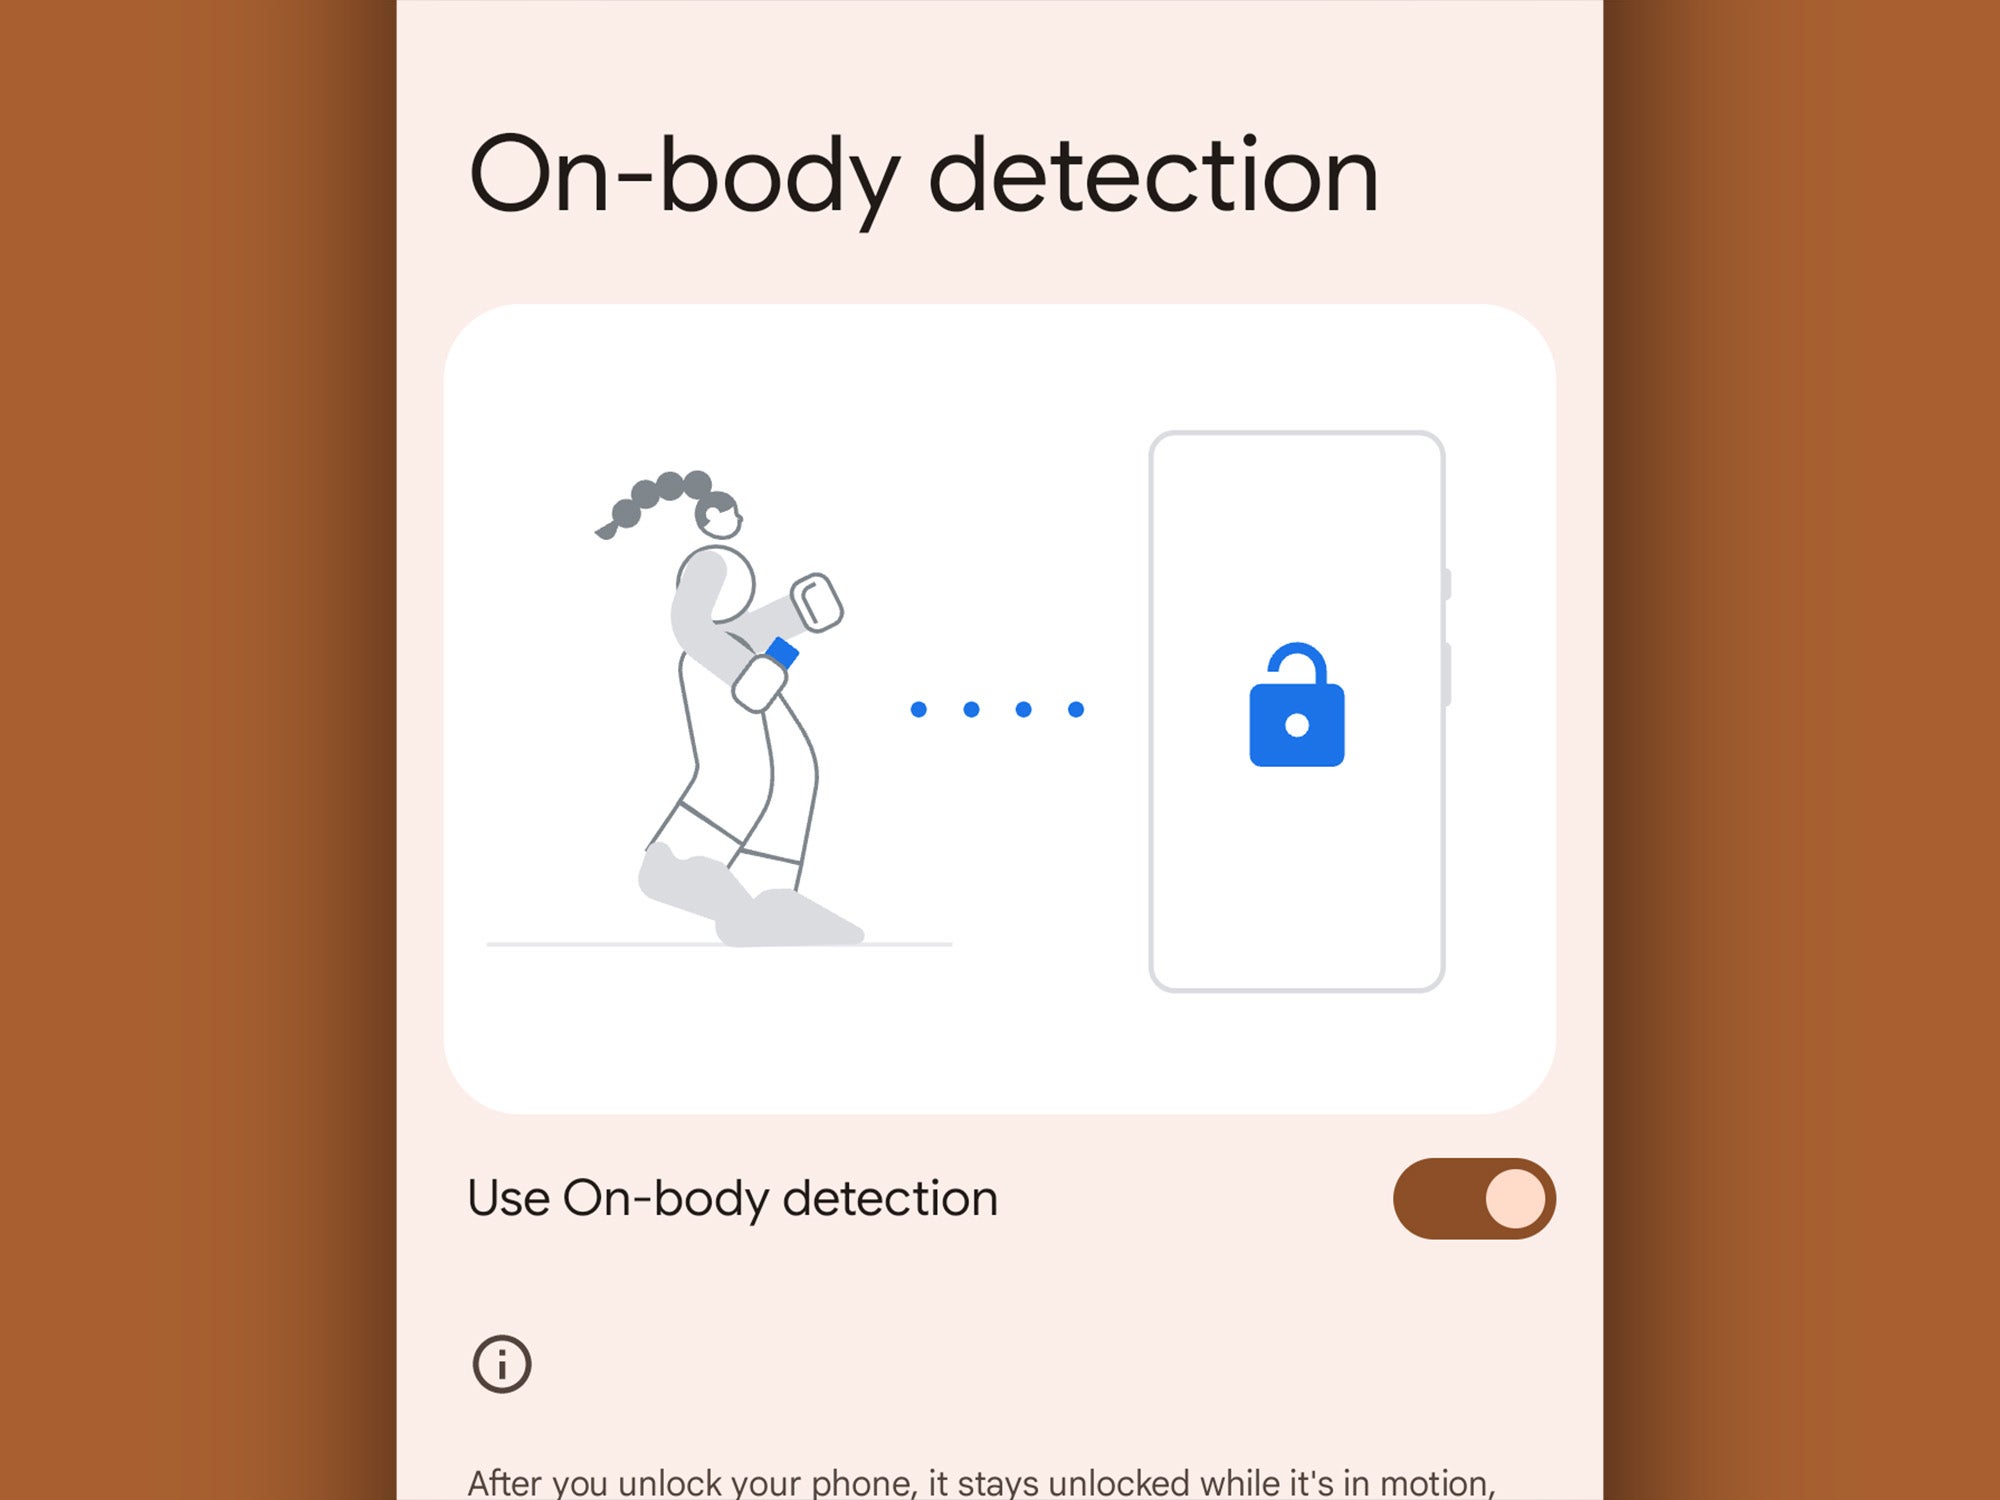 The Android menu showing the on-body detection options.